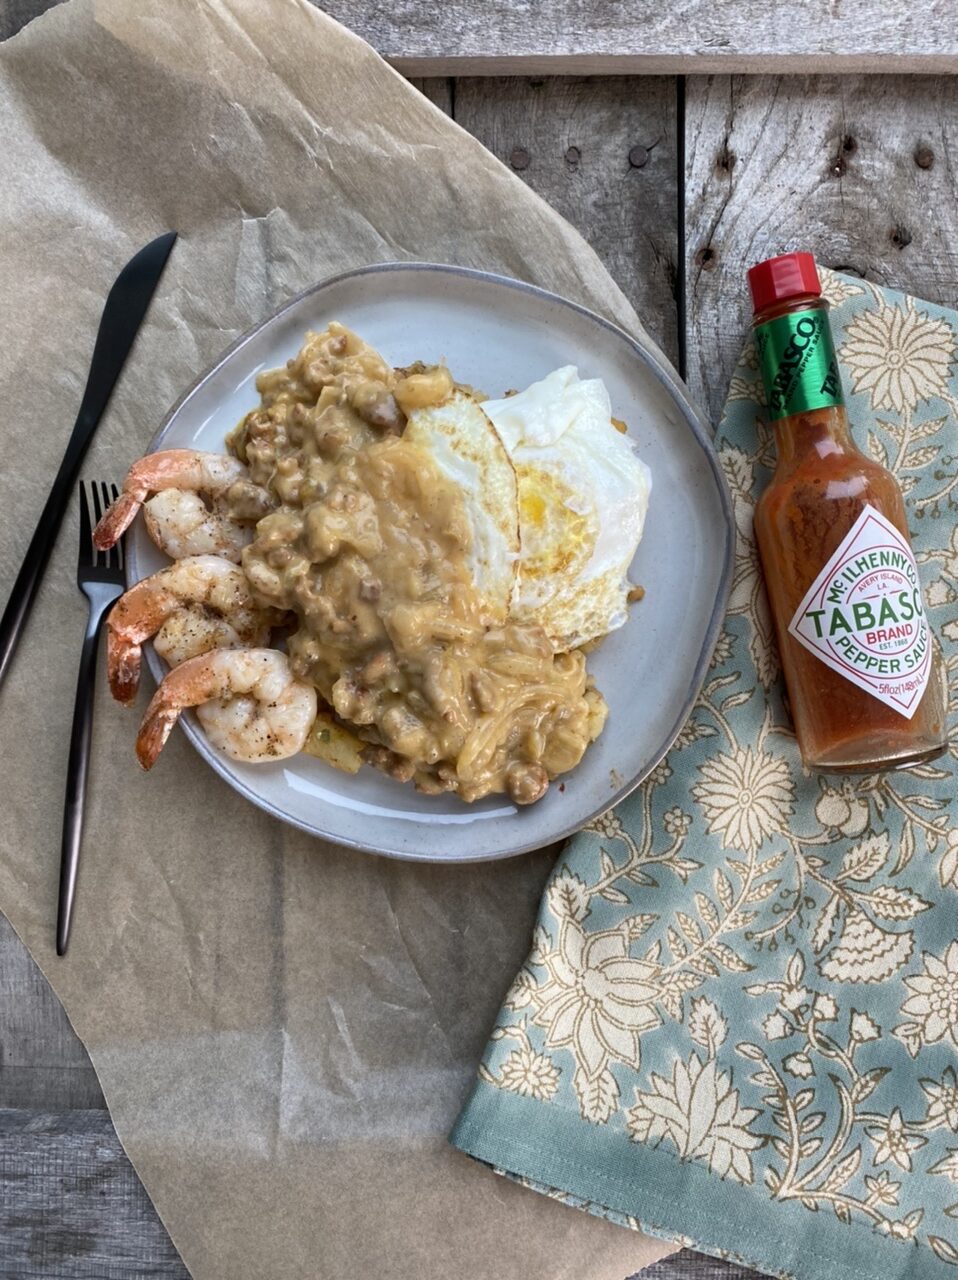 Cajun egg skillet with sausage gravy and shrimp on a white plate next to Tabasco and a hand towel